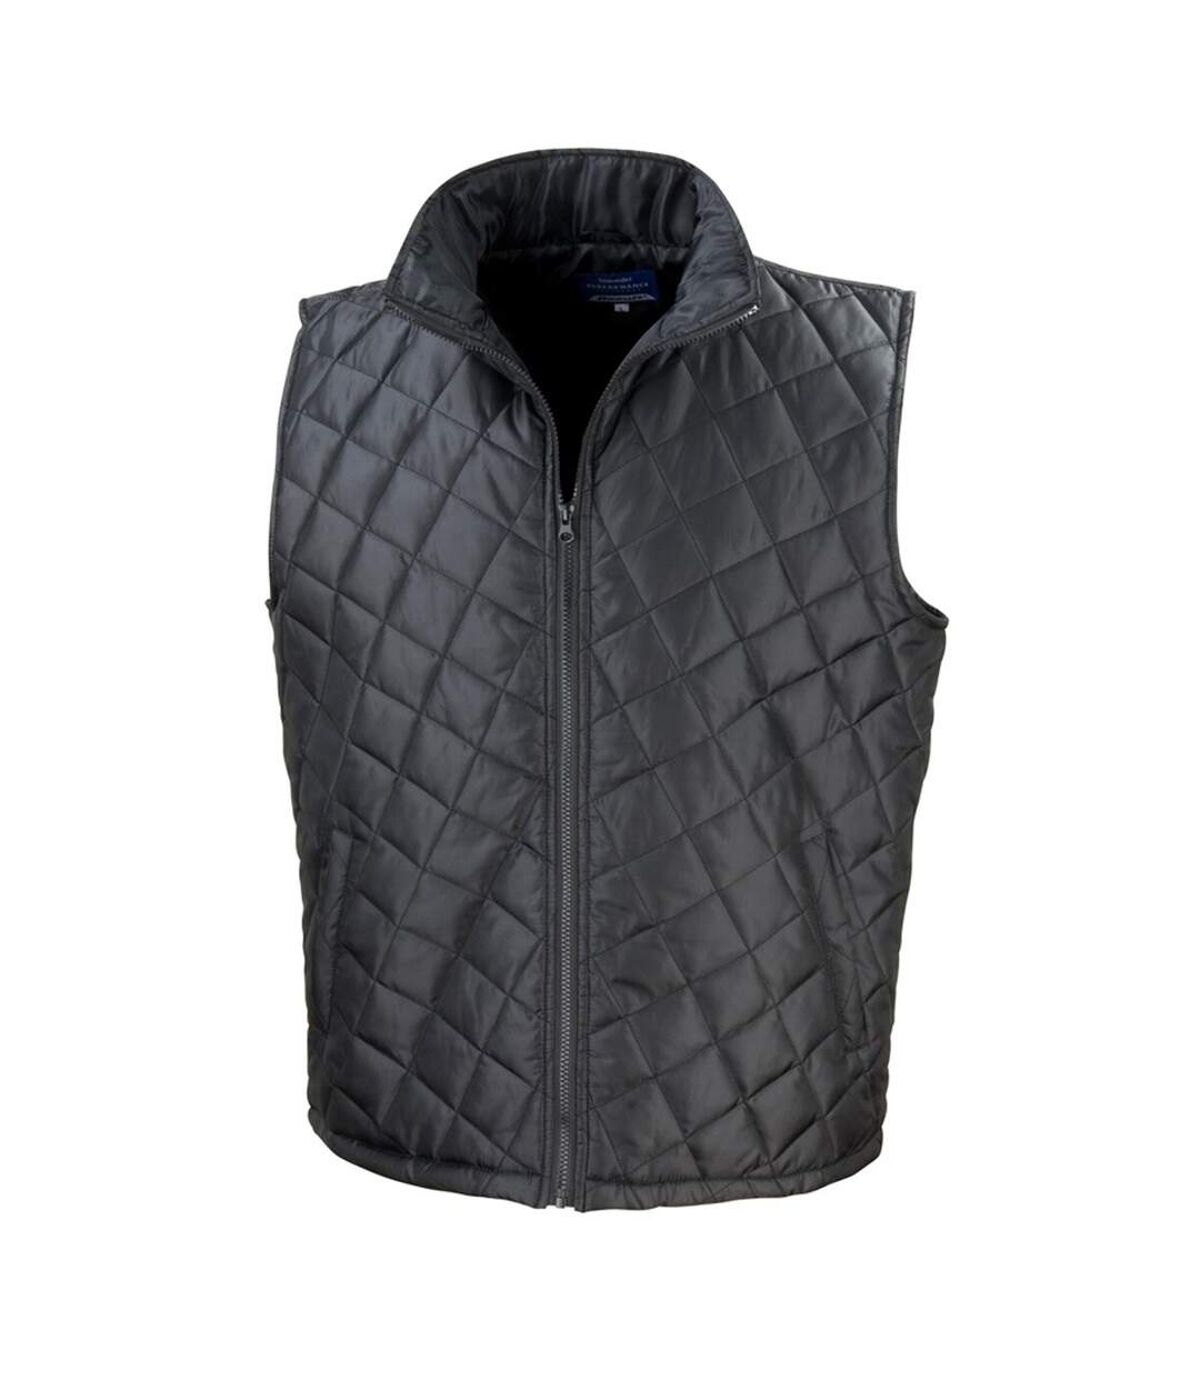 Result Mens Core 3-in-1 Jacket with Quilted Bodywarmer Jacket (Black)